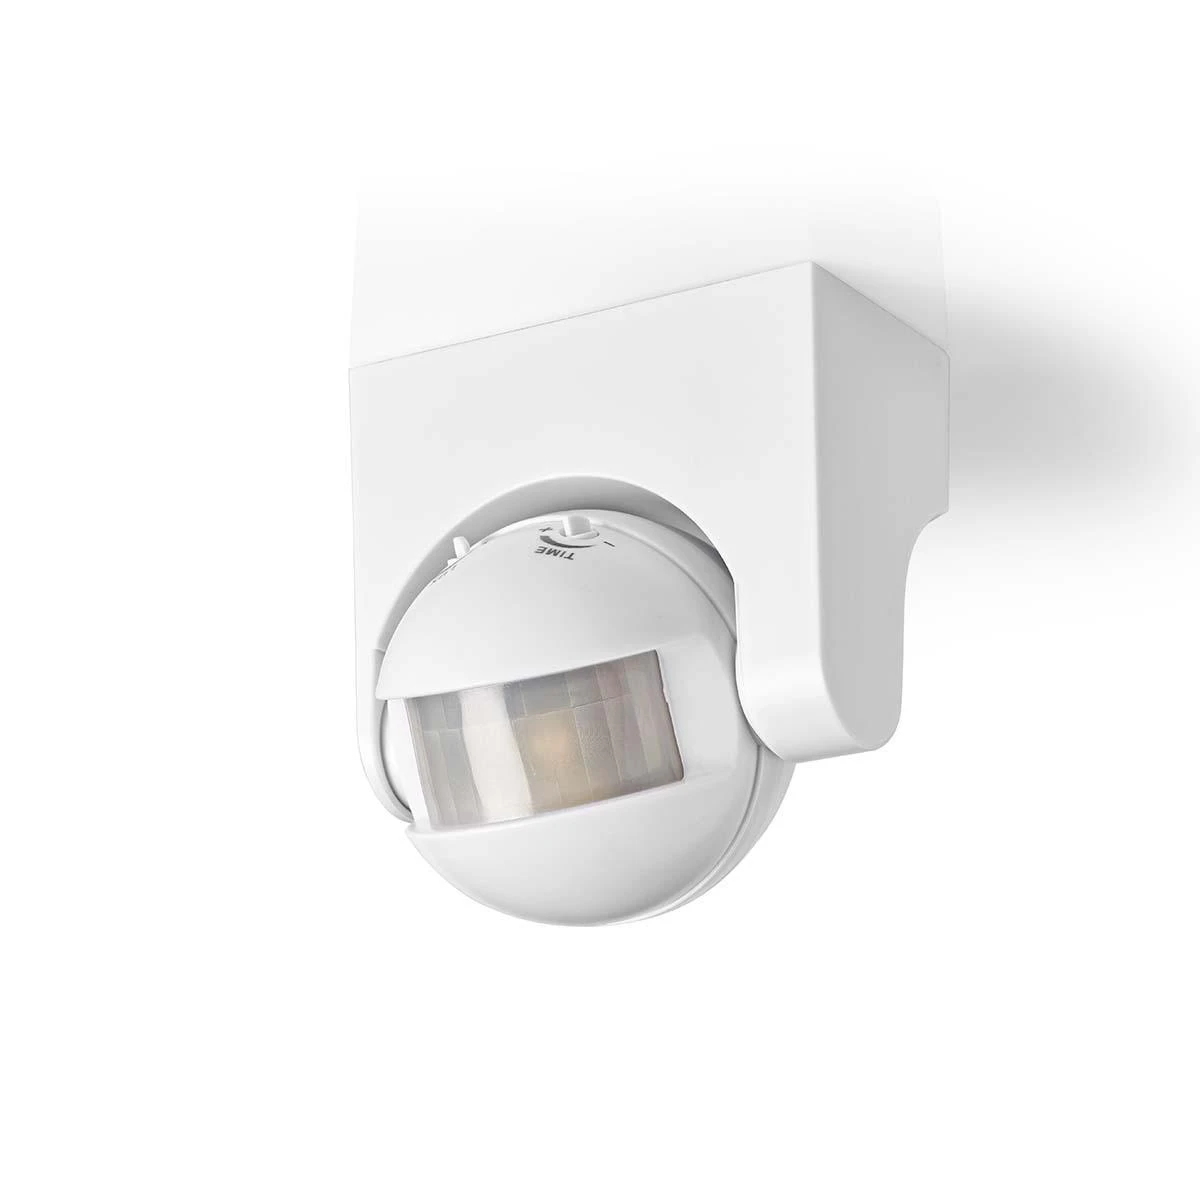 ES-P06 180 degree Wall Mounted Detetion Distance 12M IP44 Infrared Motion Sensor detector